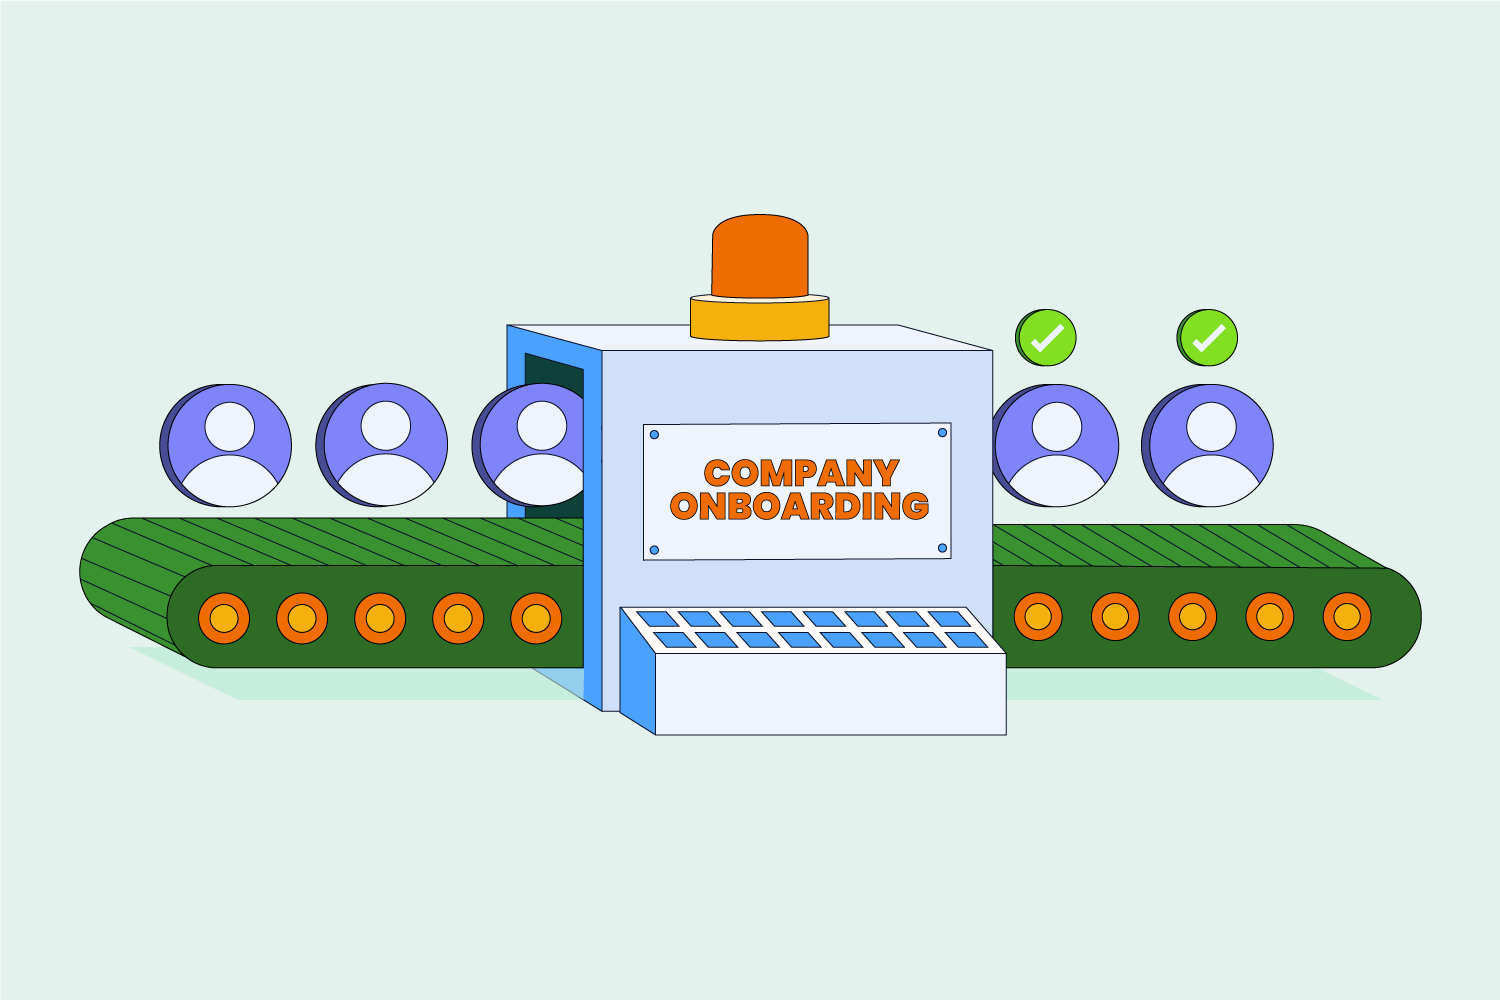 Conveyer belt with "Company Onboarding" text on the side with human avatars going through on one side and green check marks on the other